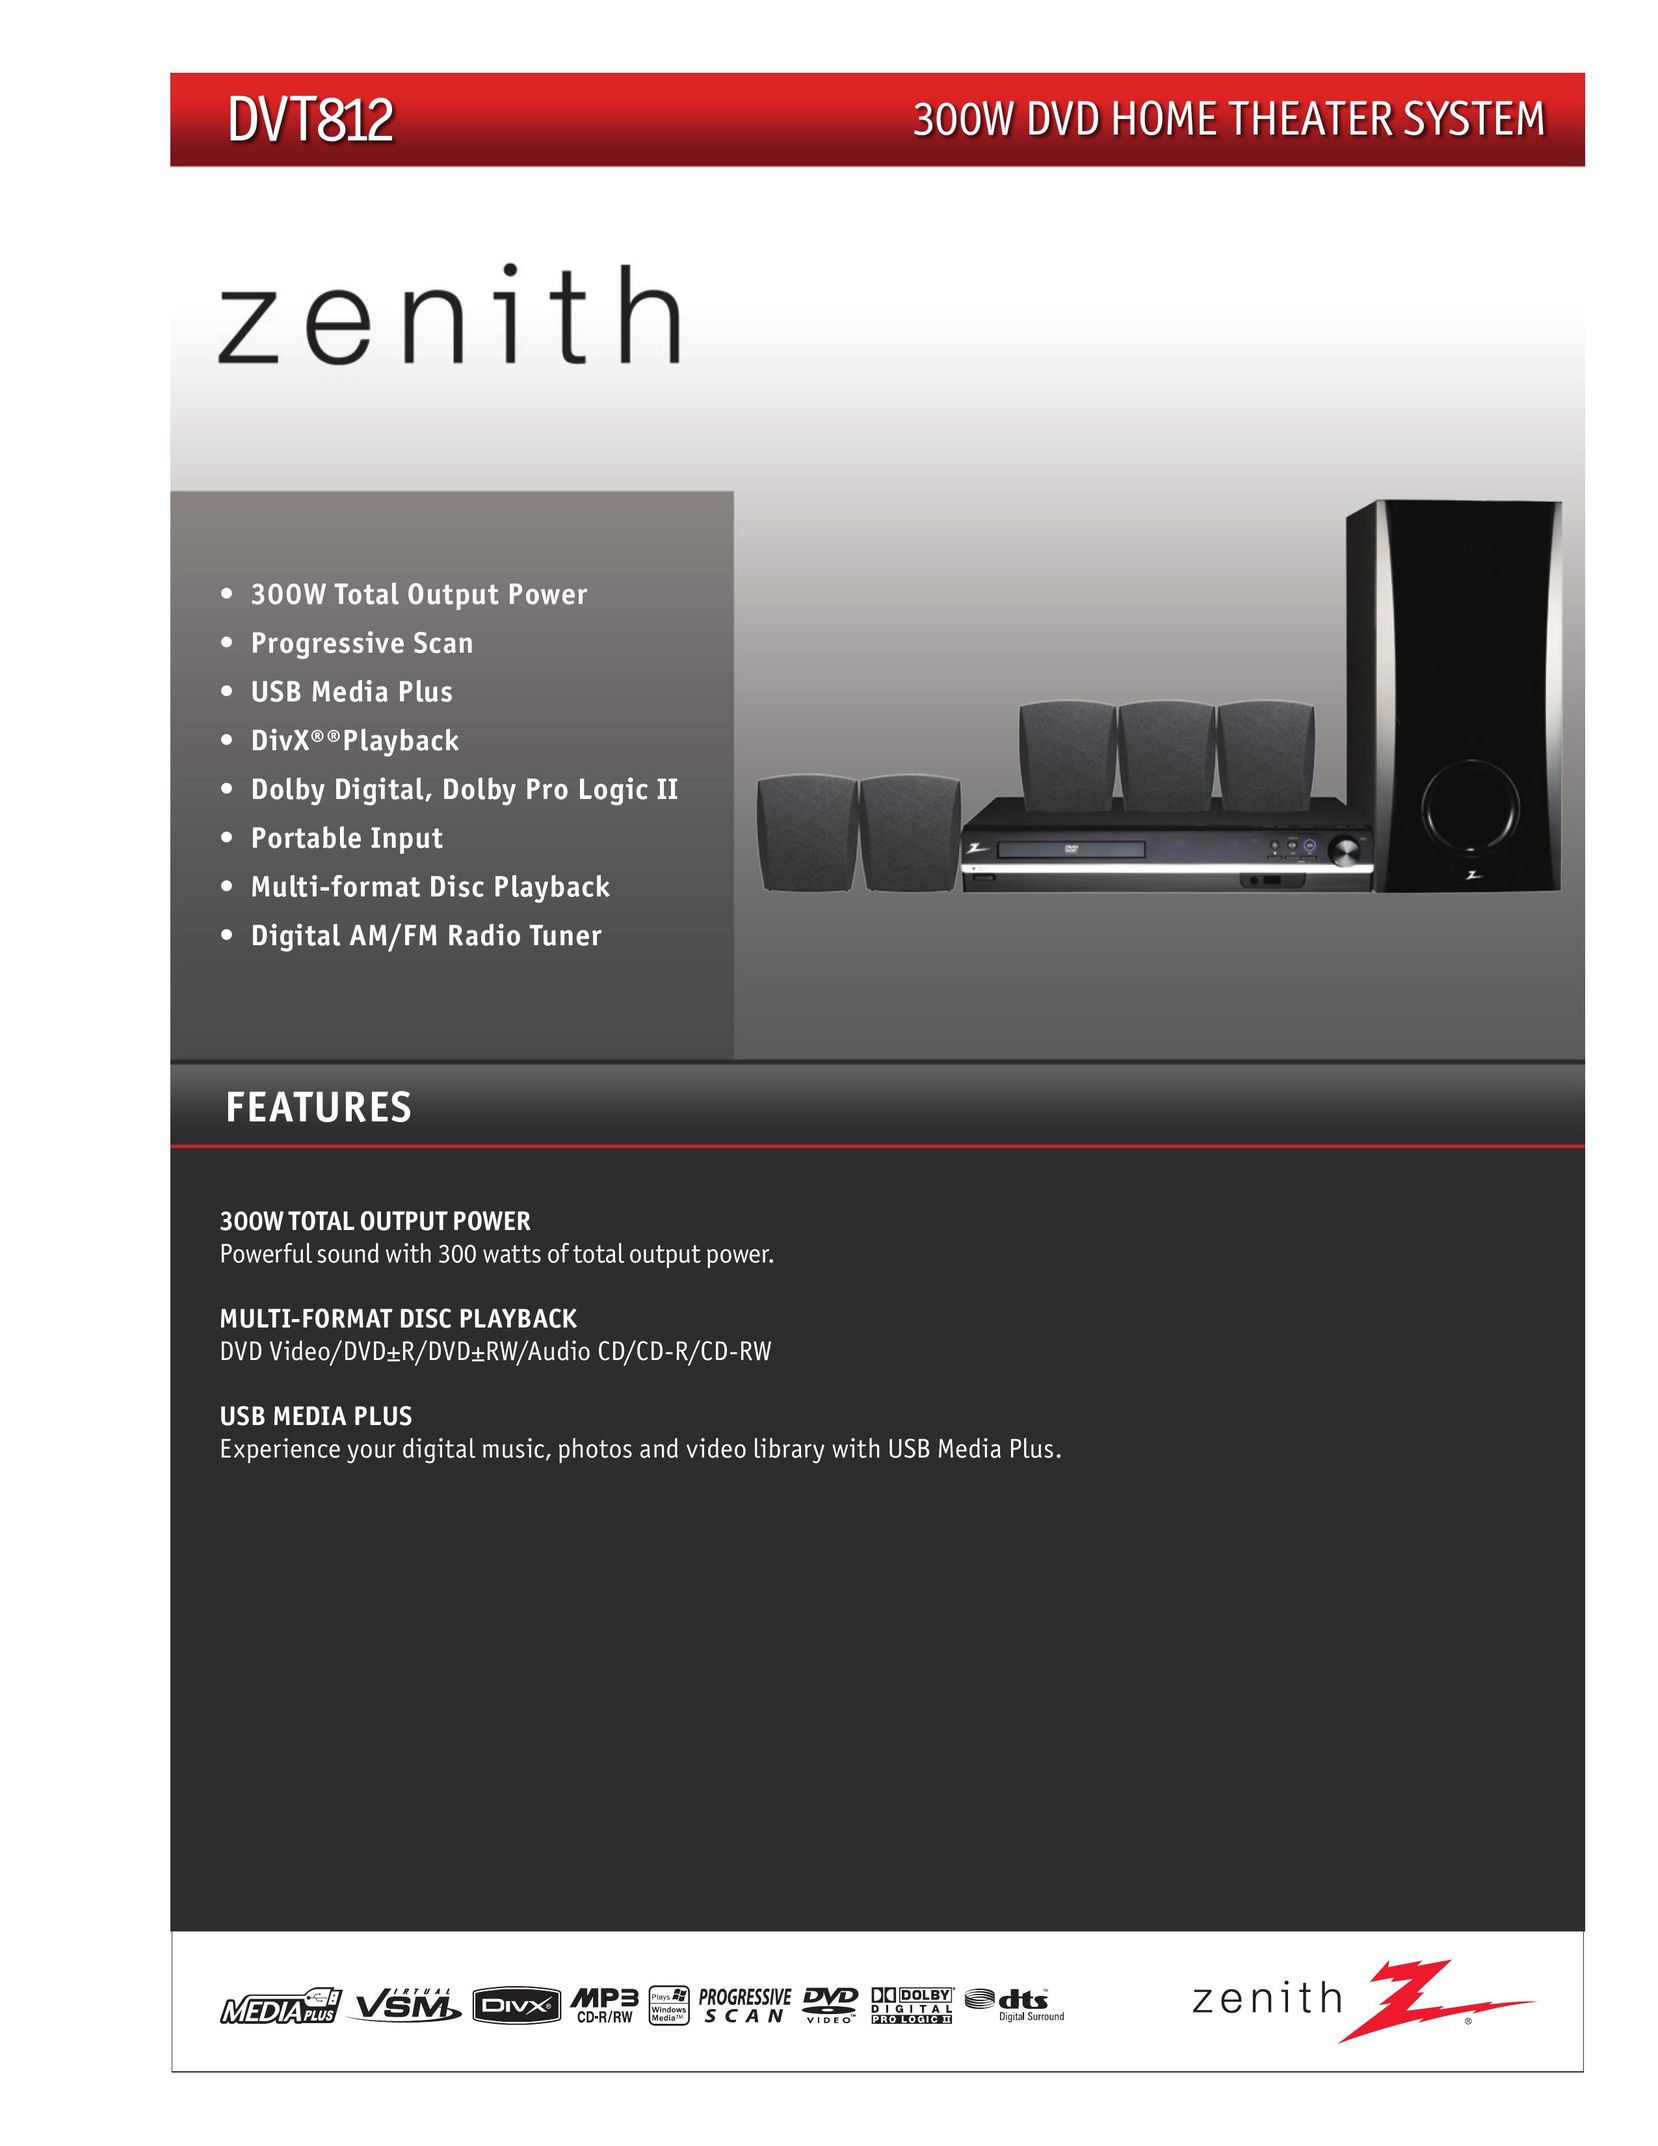 Zenith DVT812 Home Theater System User Manual